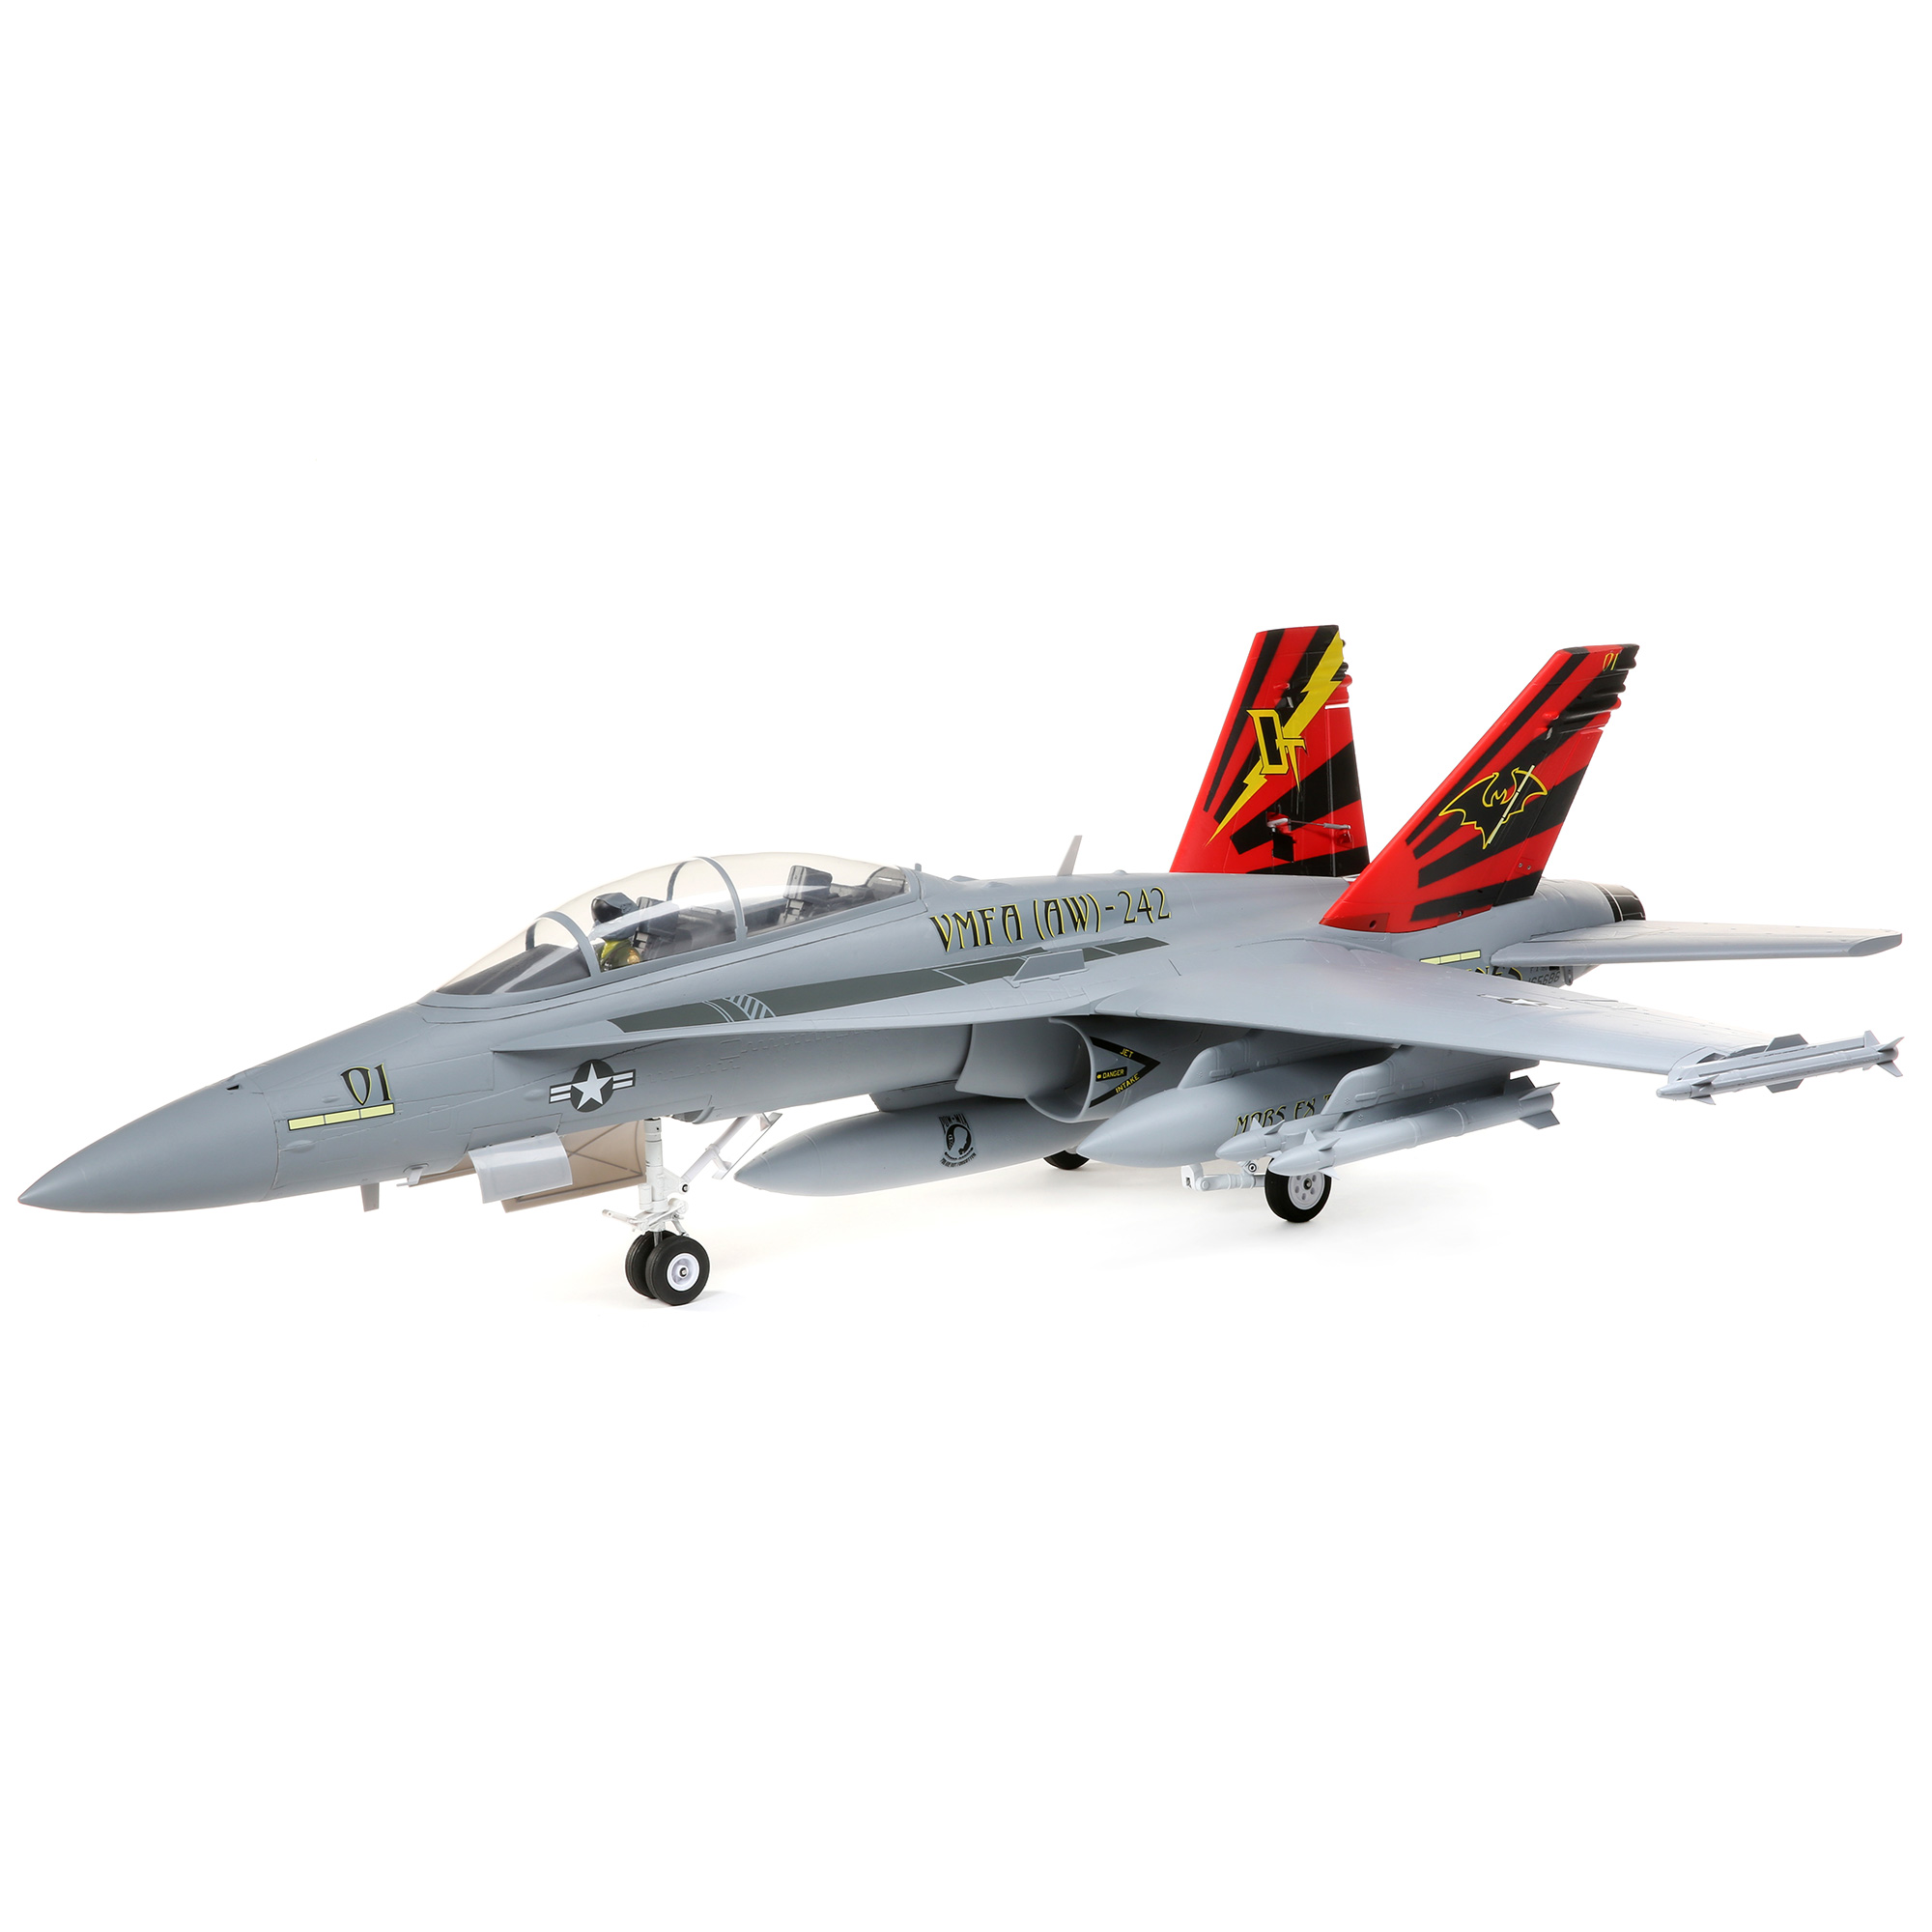 30 Wide Plastic Sign Indoor/Outdoor F-18 Super Hornet Street Sign Air Force Aircraft Military 